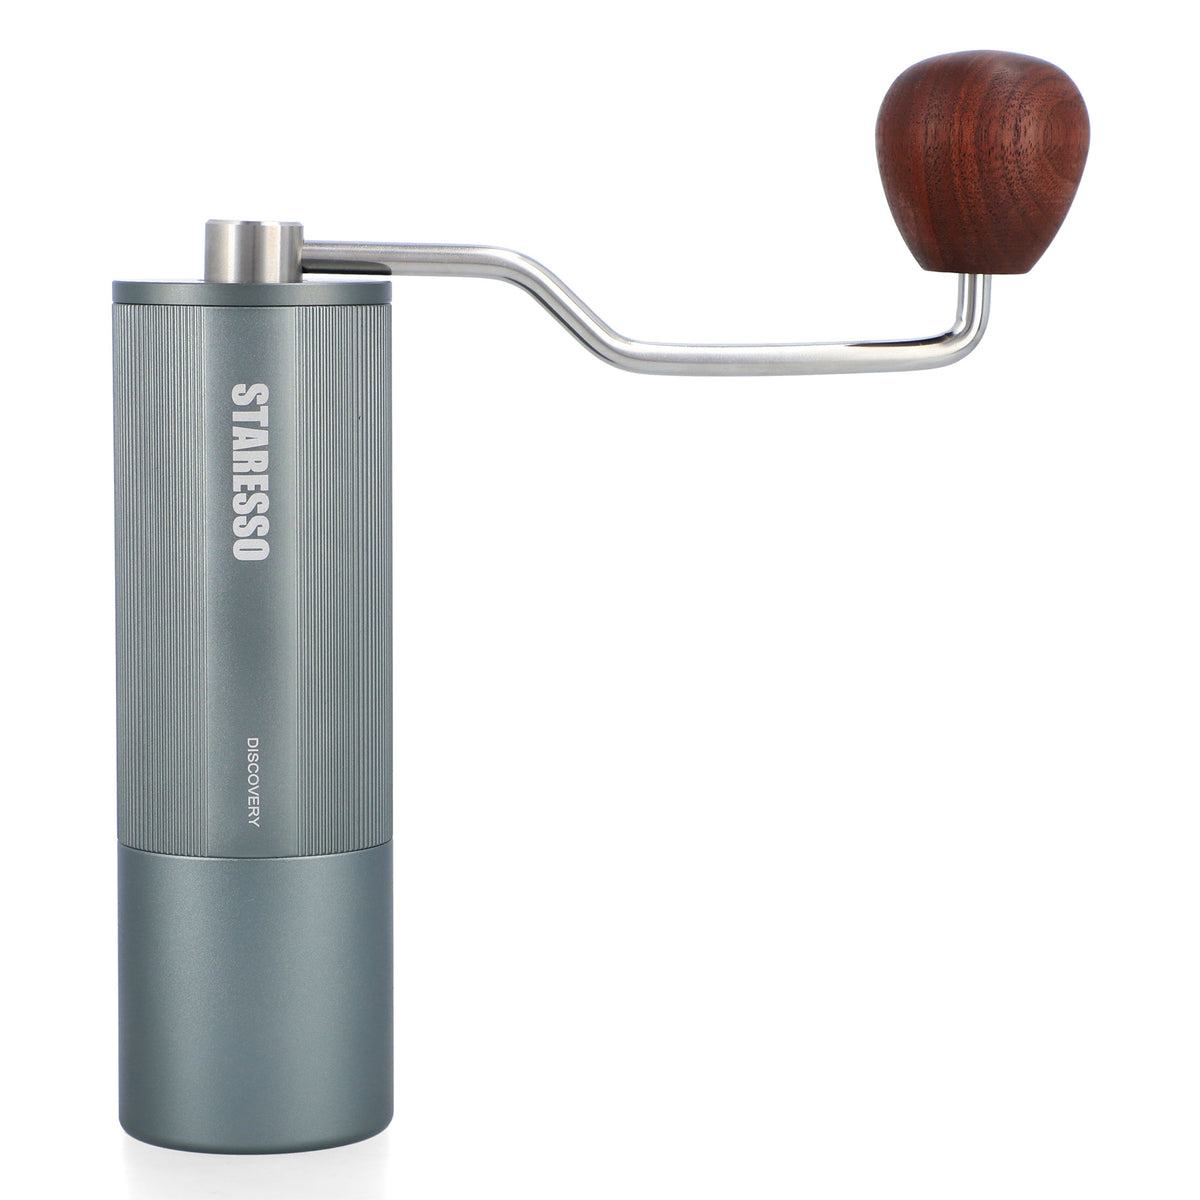 STARESSO Portable Manual Coffee Grinder